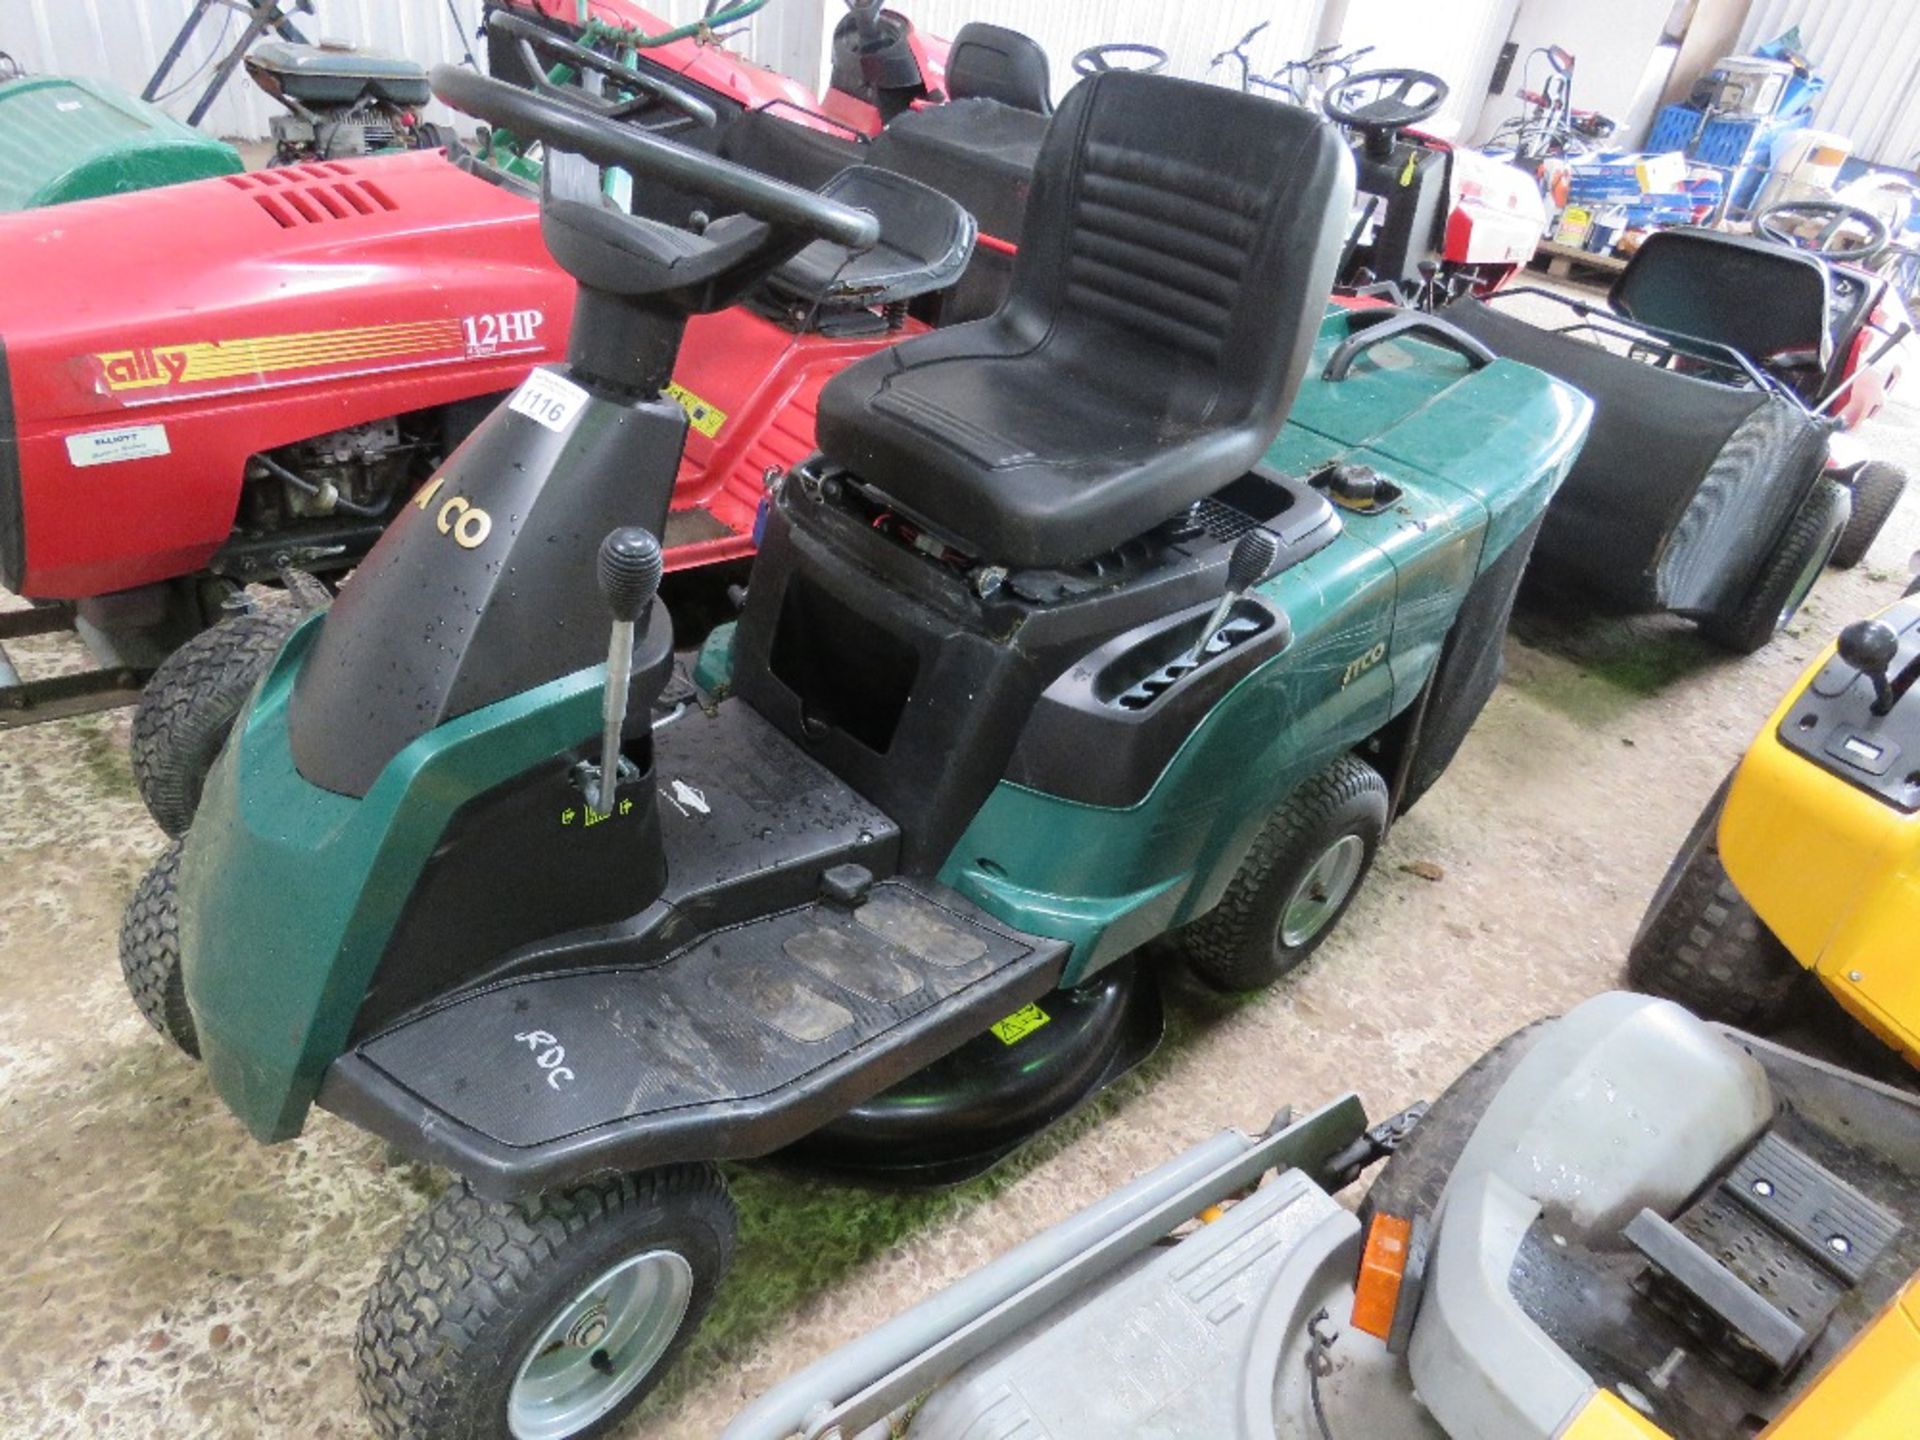 ATCO RIDER RIDE ON MOWER WITH COLLECTOR. WHEN BRIEFLY TESTED WAS SEEN TO RUN, DRIVE AND MOWERS ENGAG